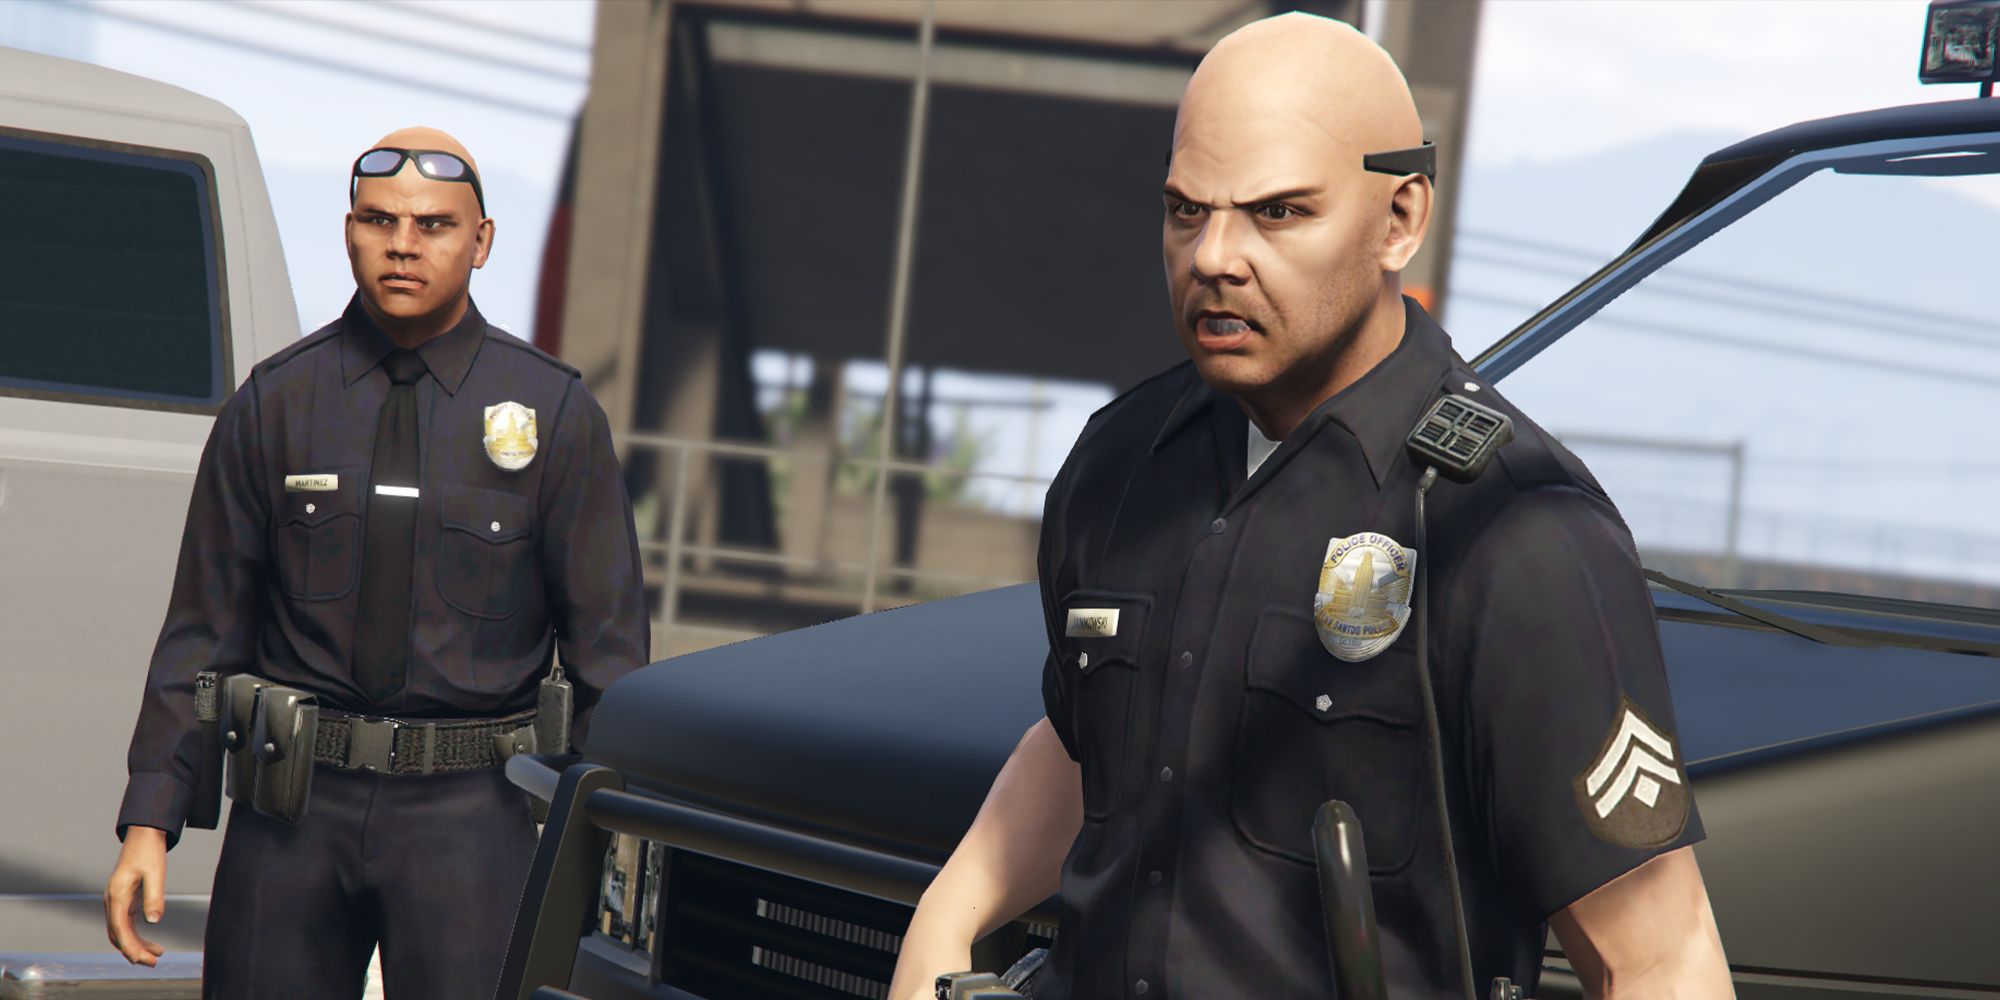 Two police officers in GTA Online staring angrily into the camera